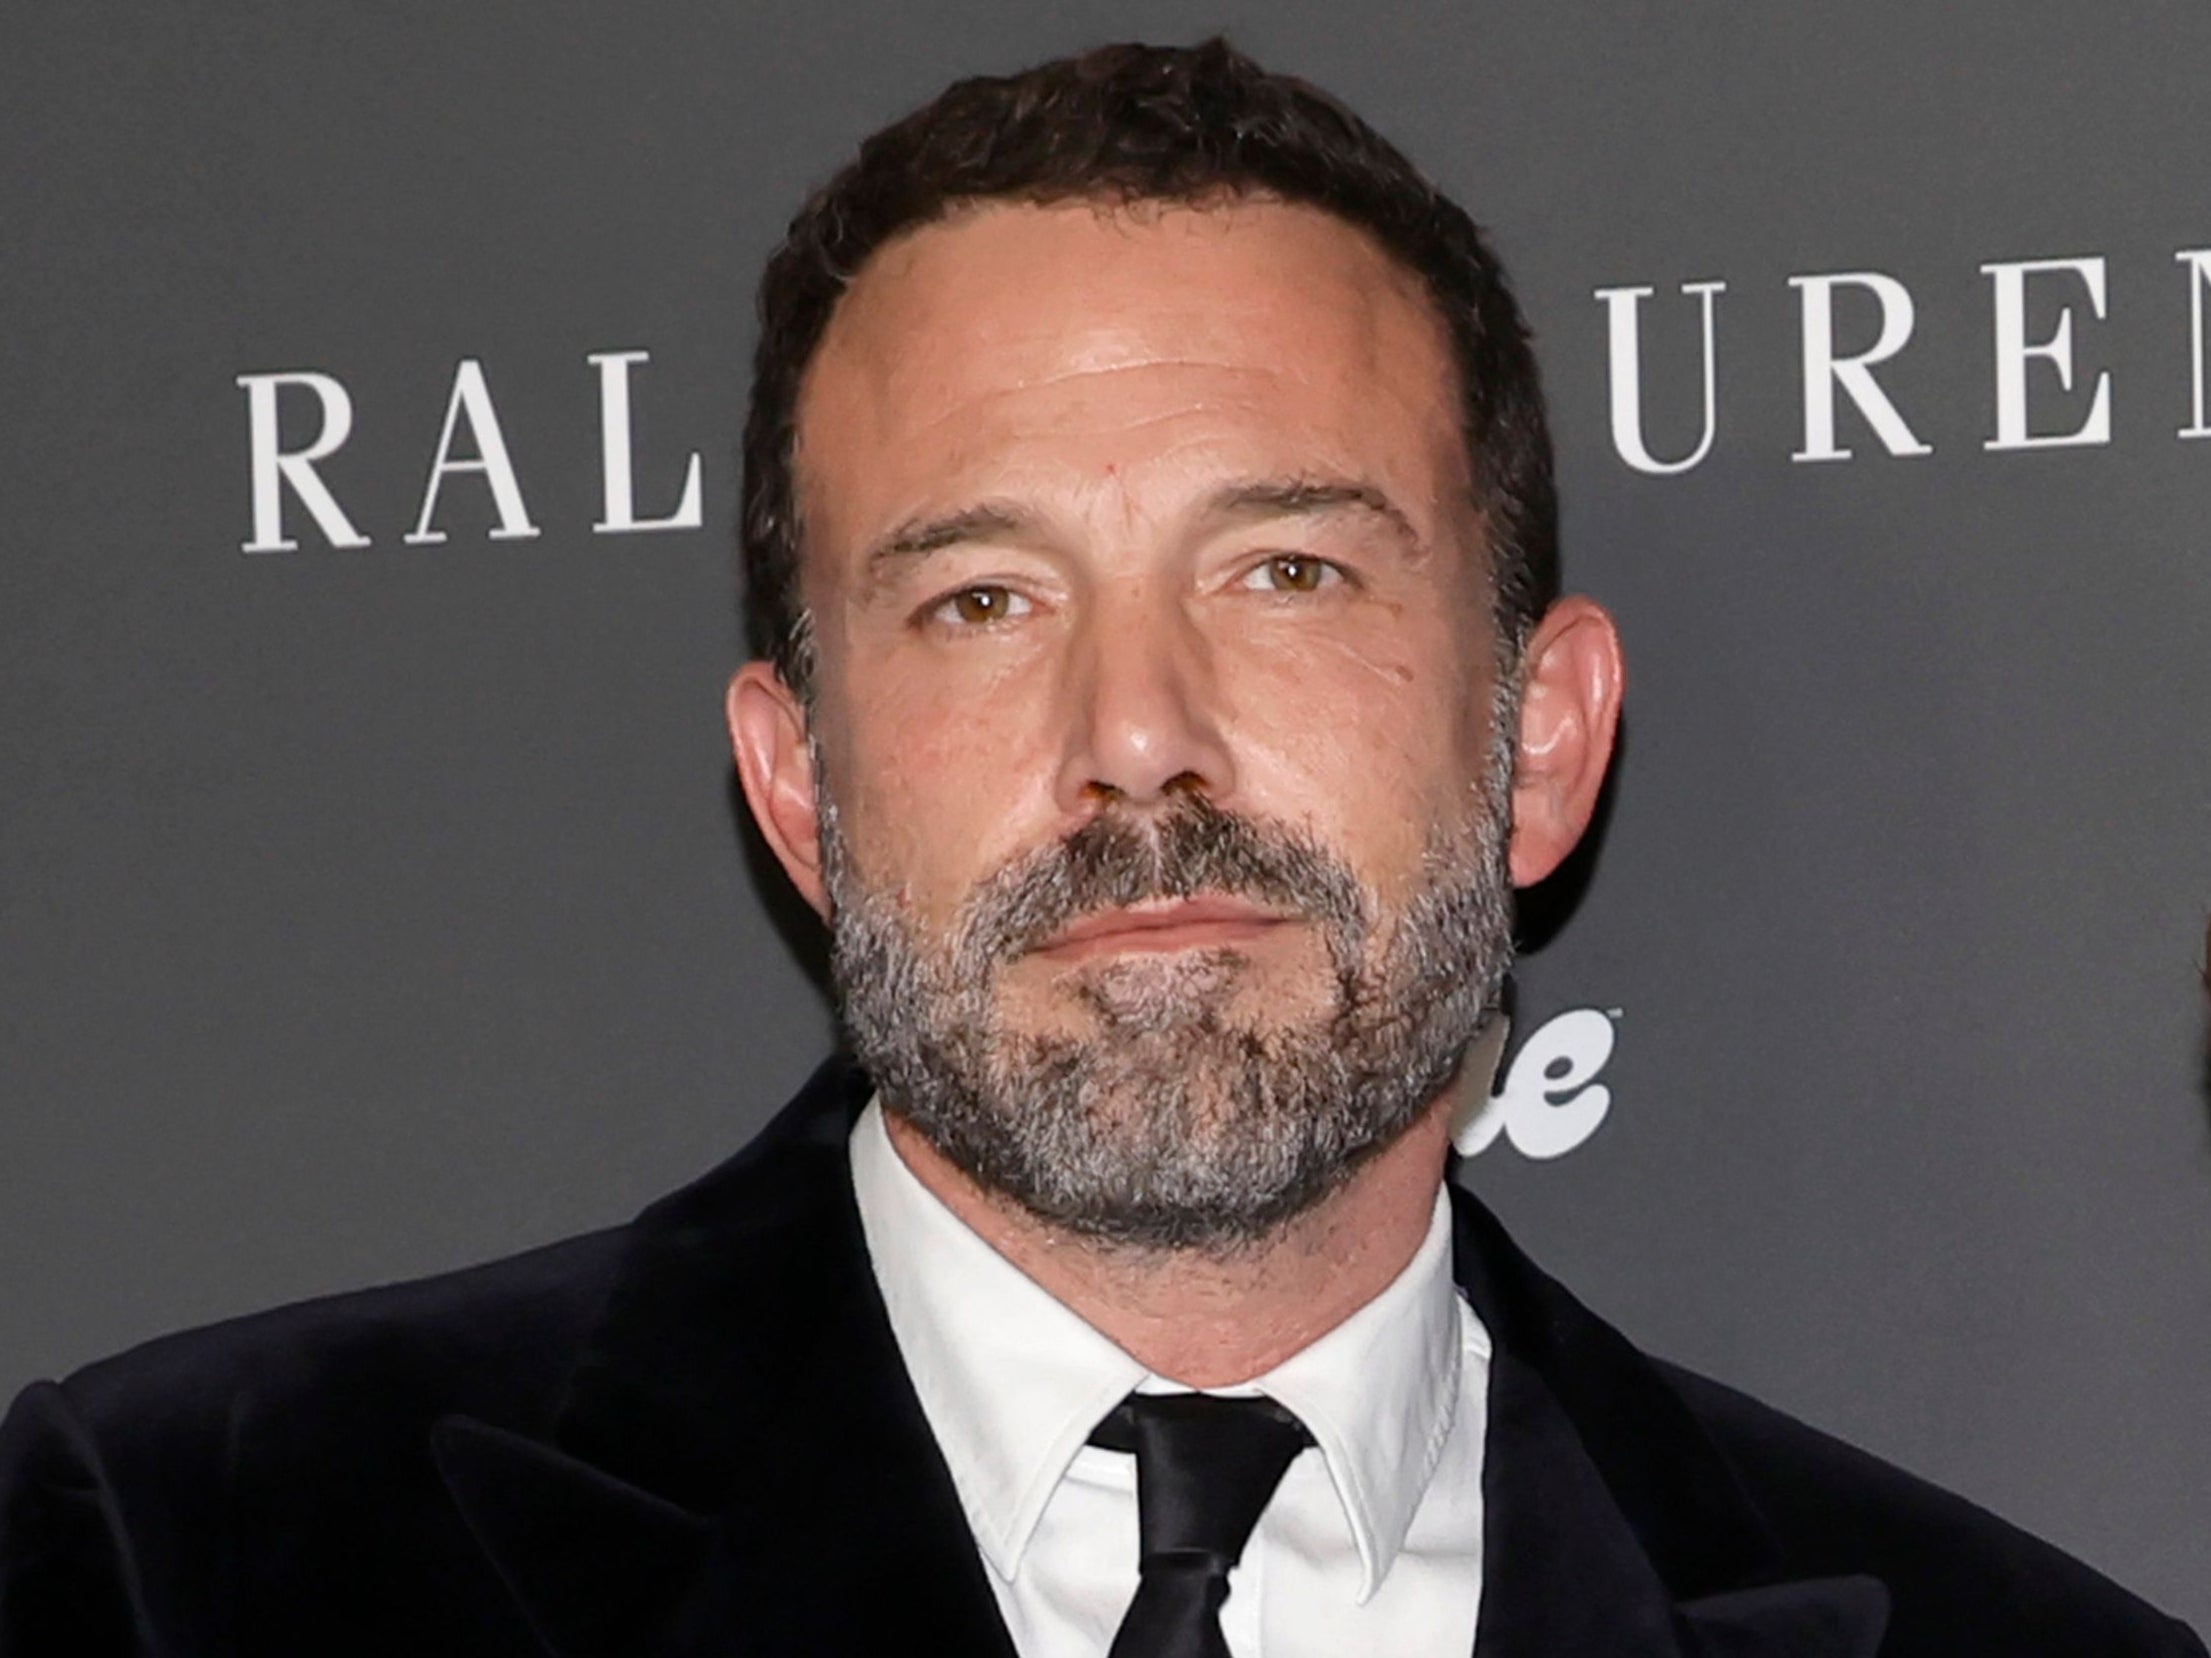 Ben Affleck explains why he always seems angry in paparazzi photos